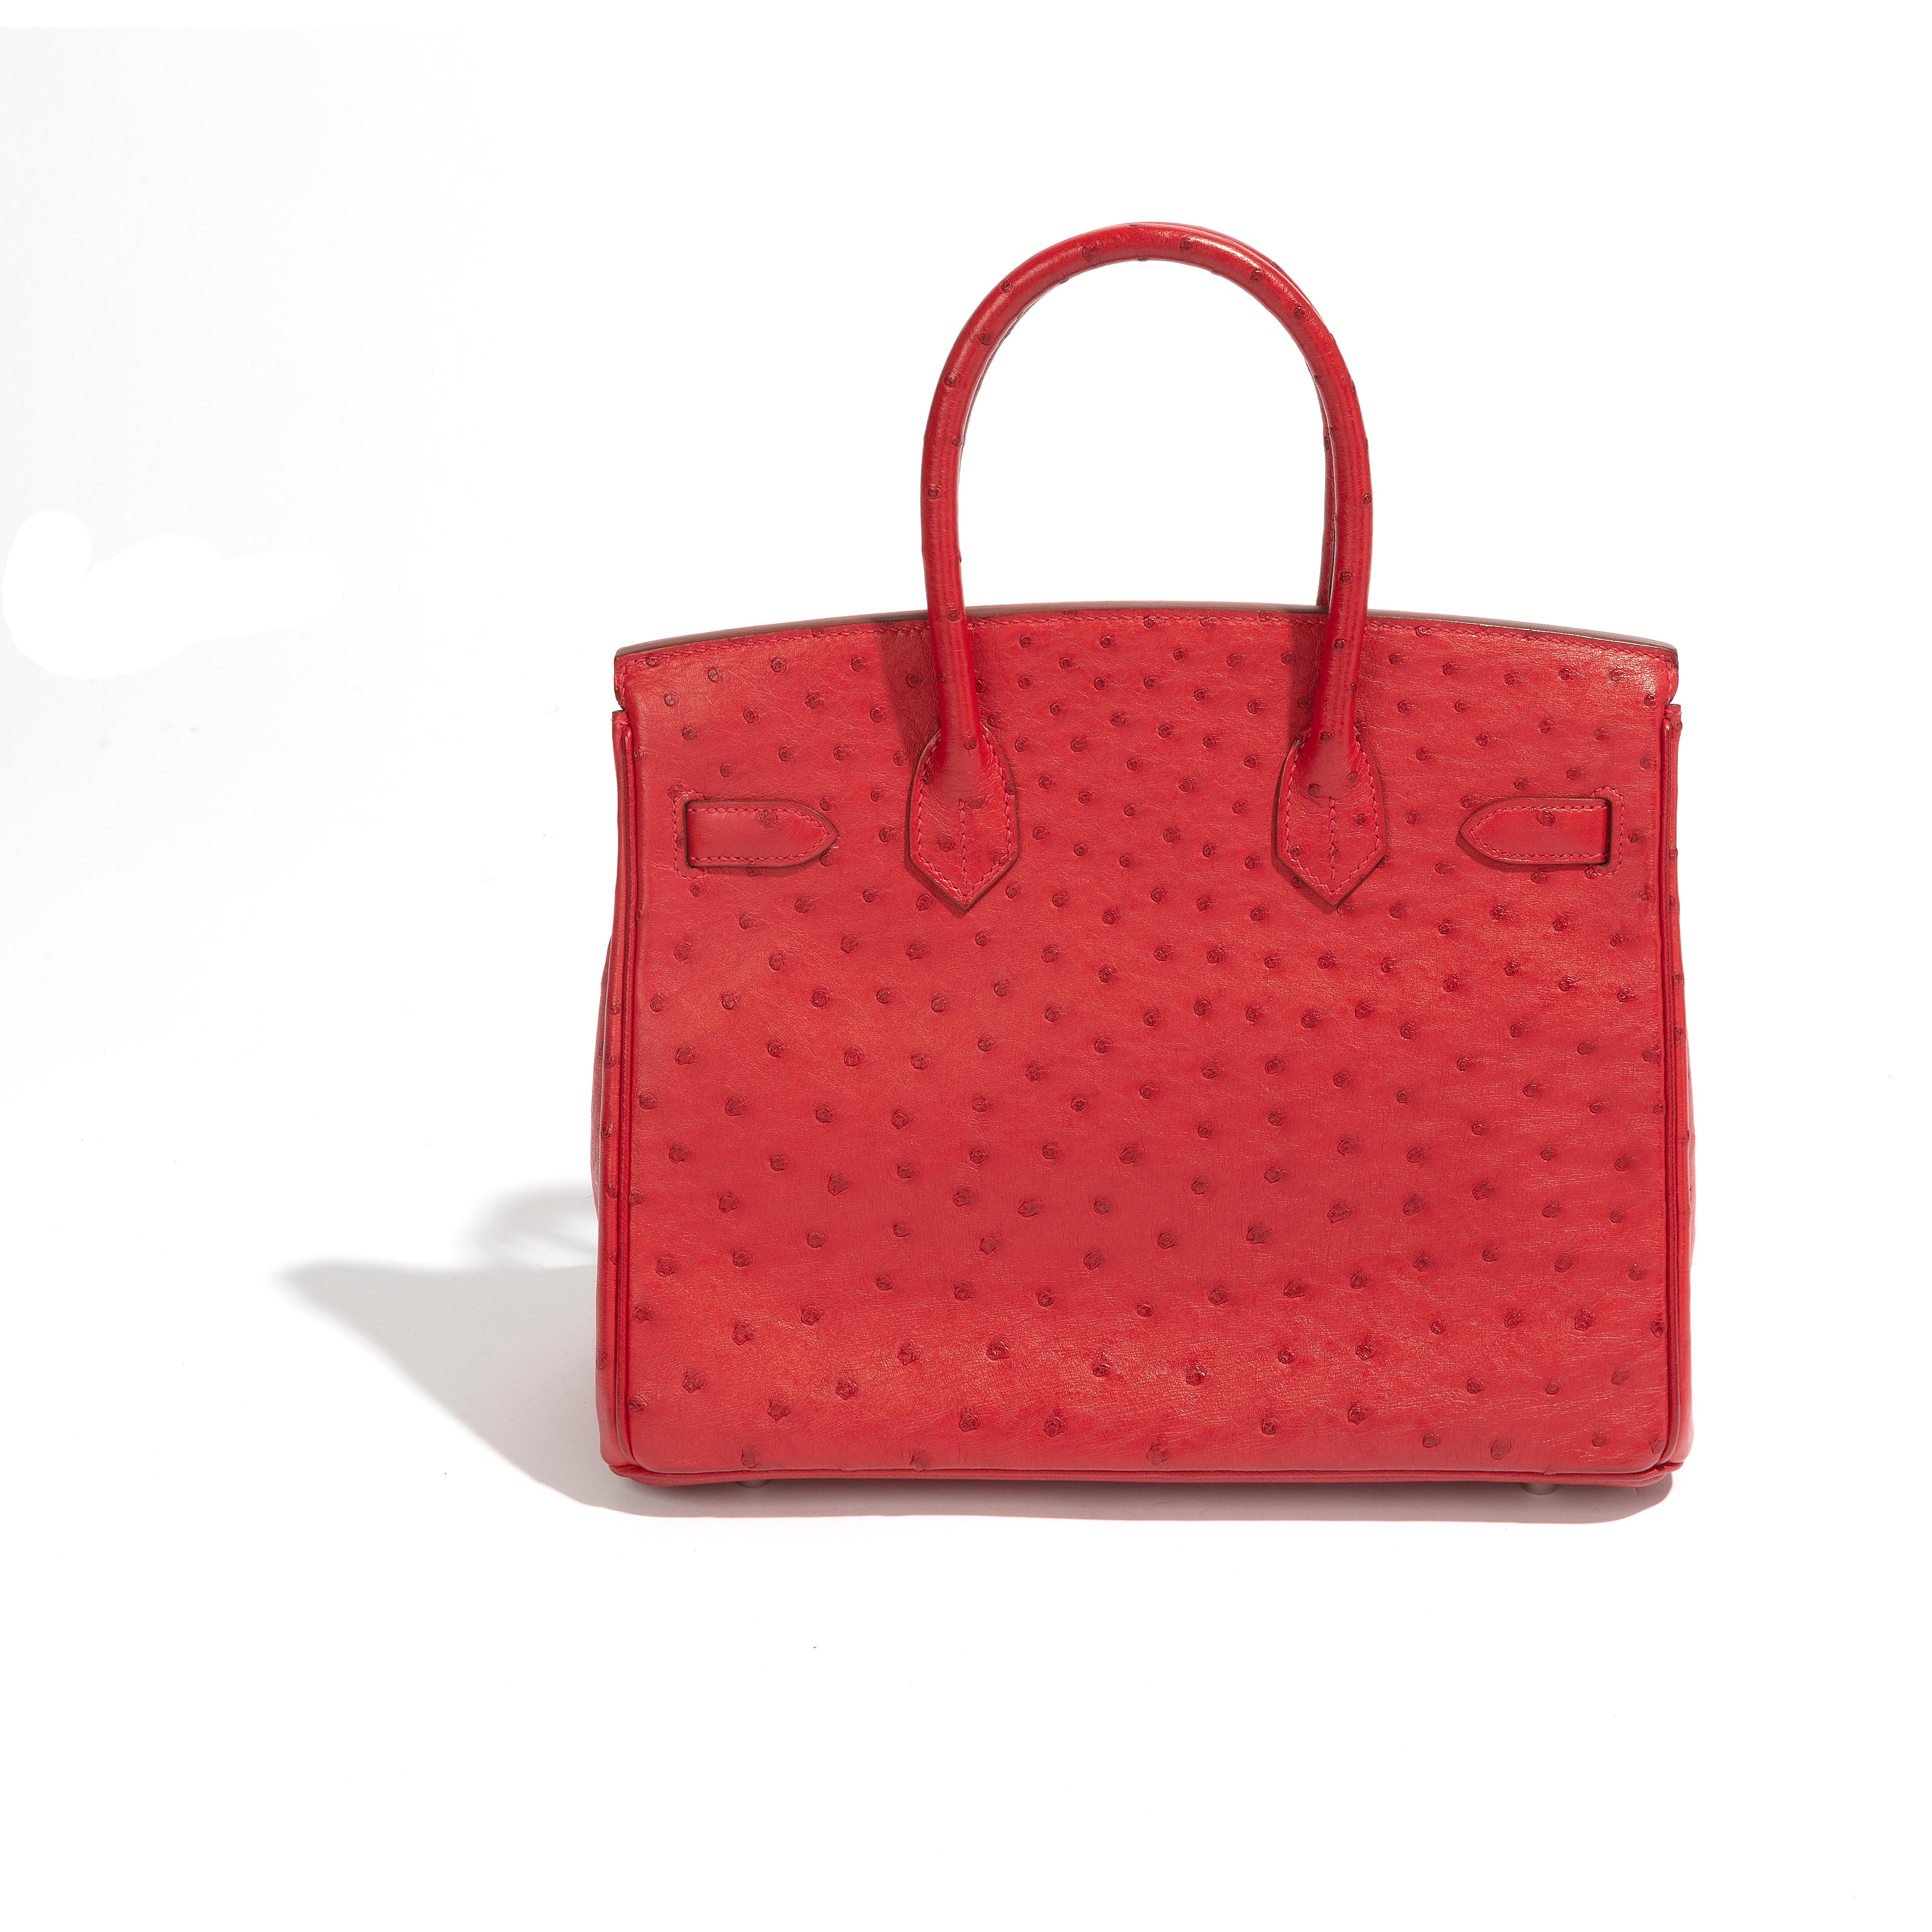 This Birkin 30 is a highly sought-after piece crafted from premium quality red leather and finished with stunning palladium hardware. The bag has been well-maintained and is in excellent condition, making it a rare find for any fashion enthusiast.